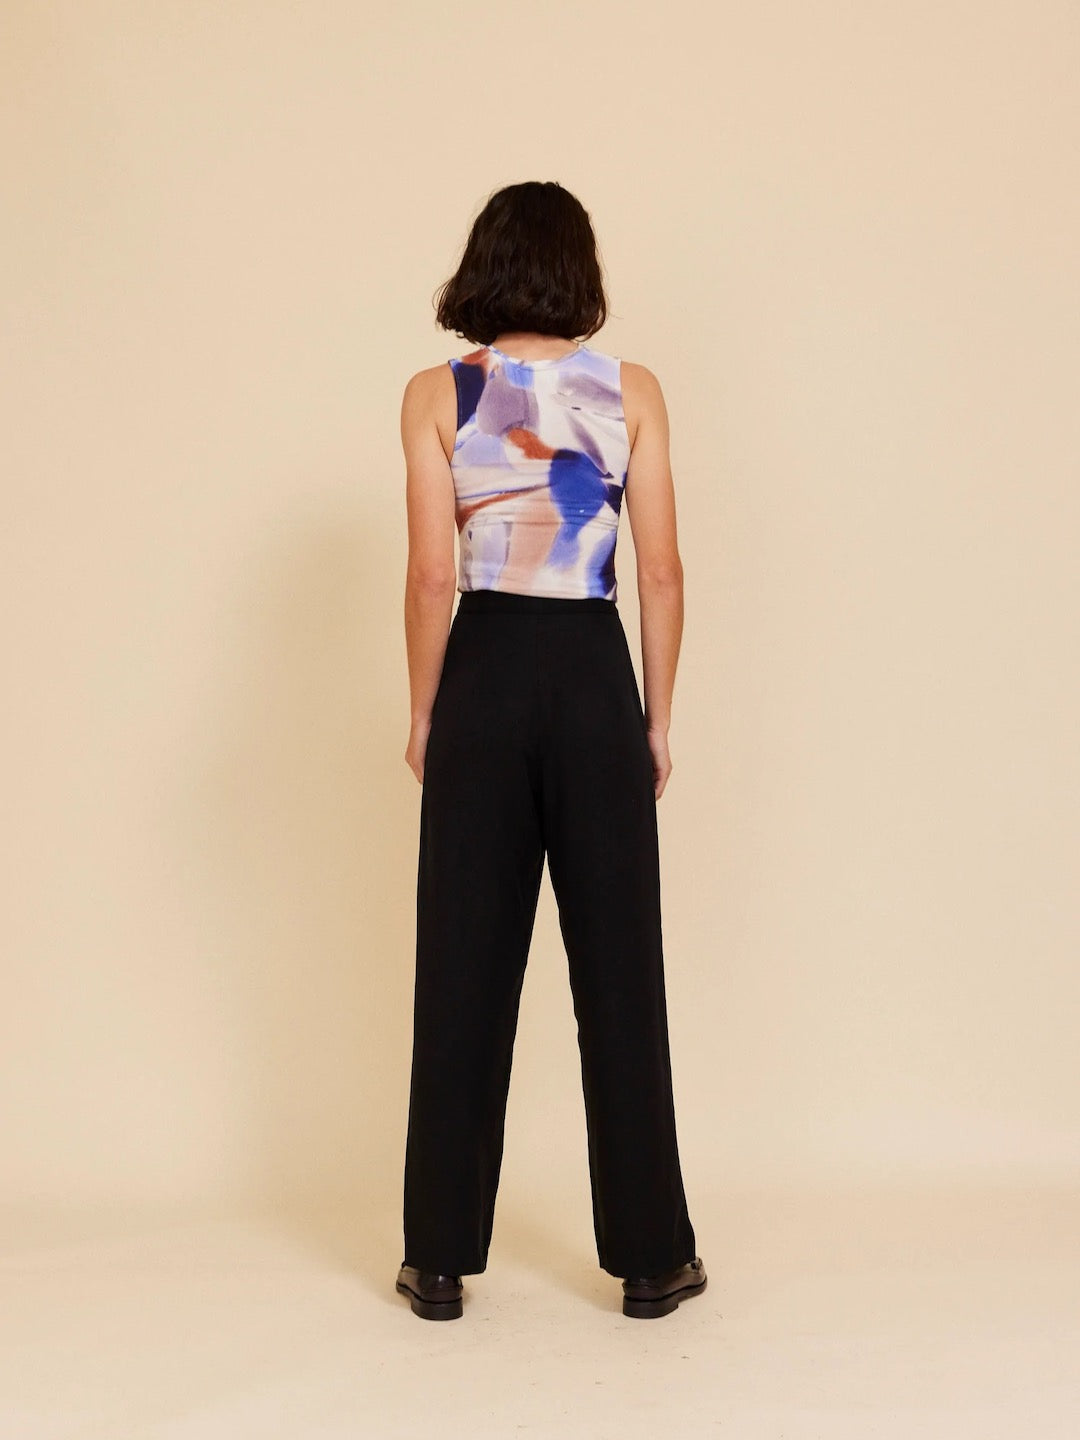 The back view of a woman wearing an OVNA OVICH black top and Me Time Trouser – Onyx wide leg pants.